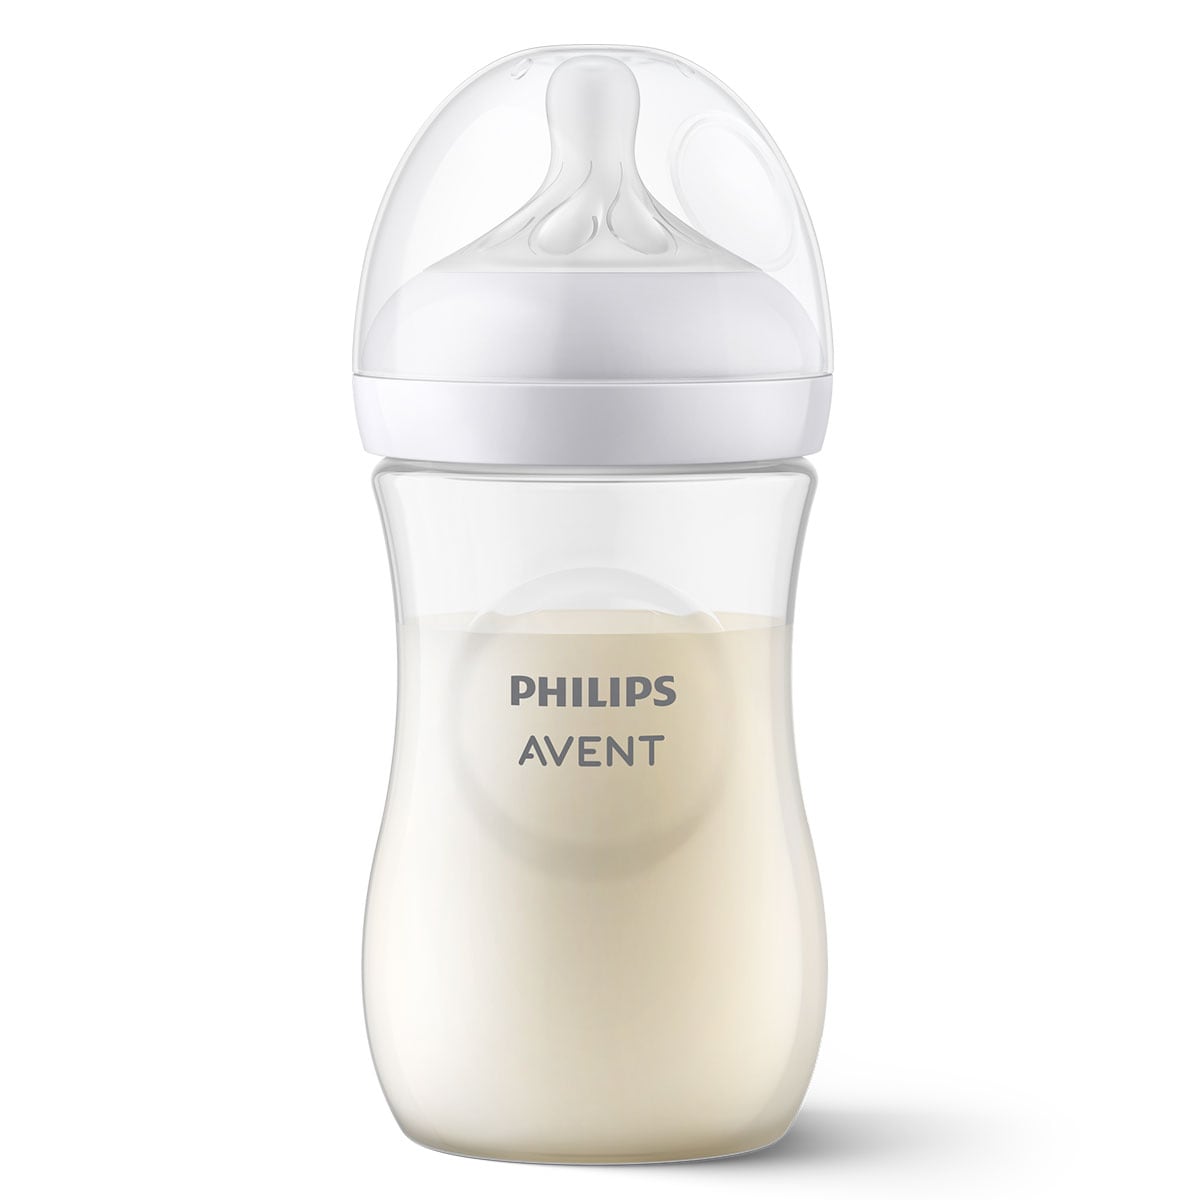 Avent Natural Response Baby Bottles 1 Month+ 260ml - 1 Pack